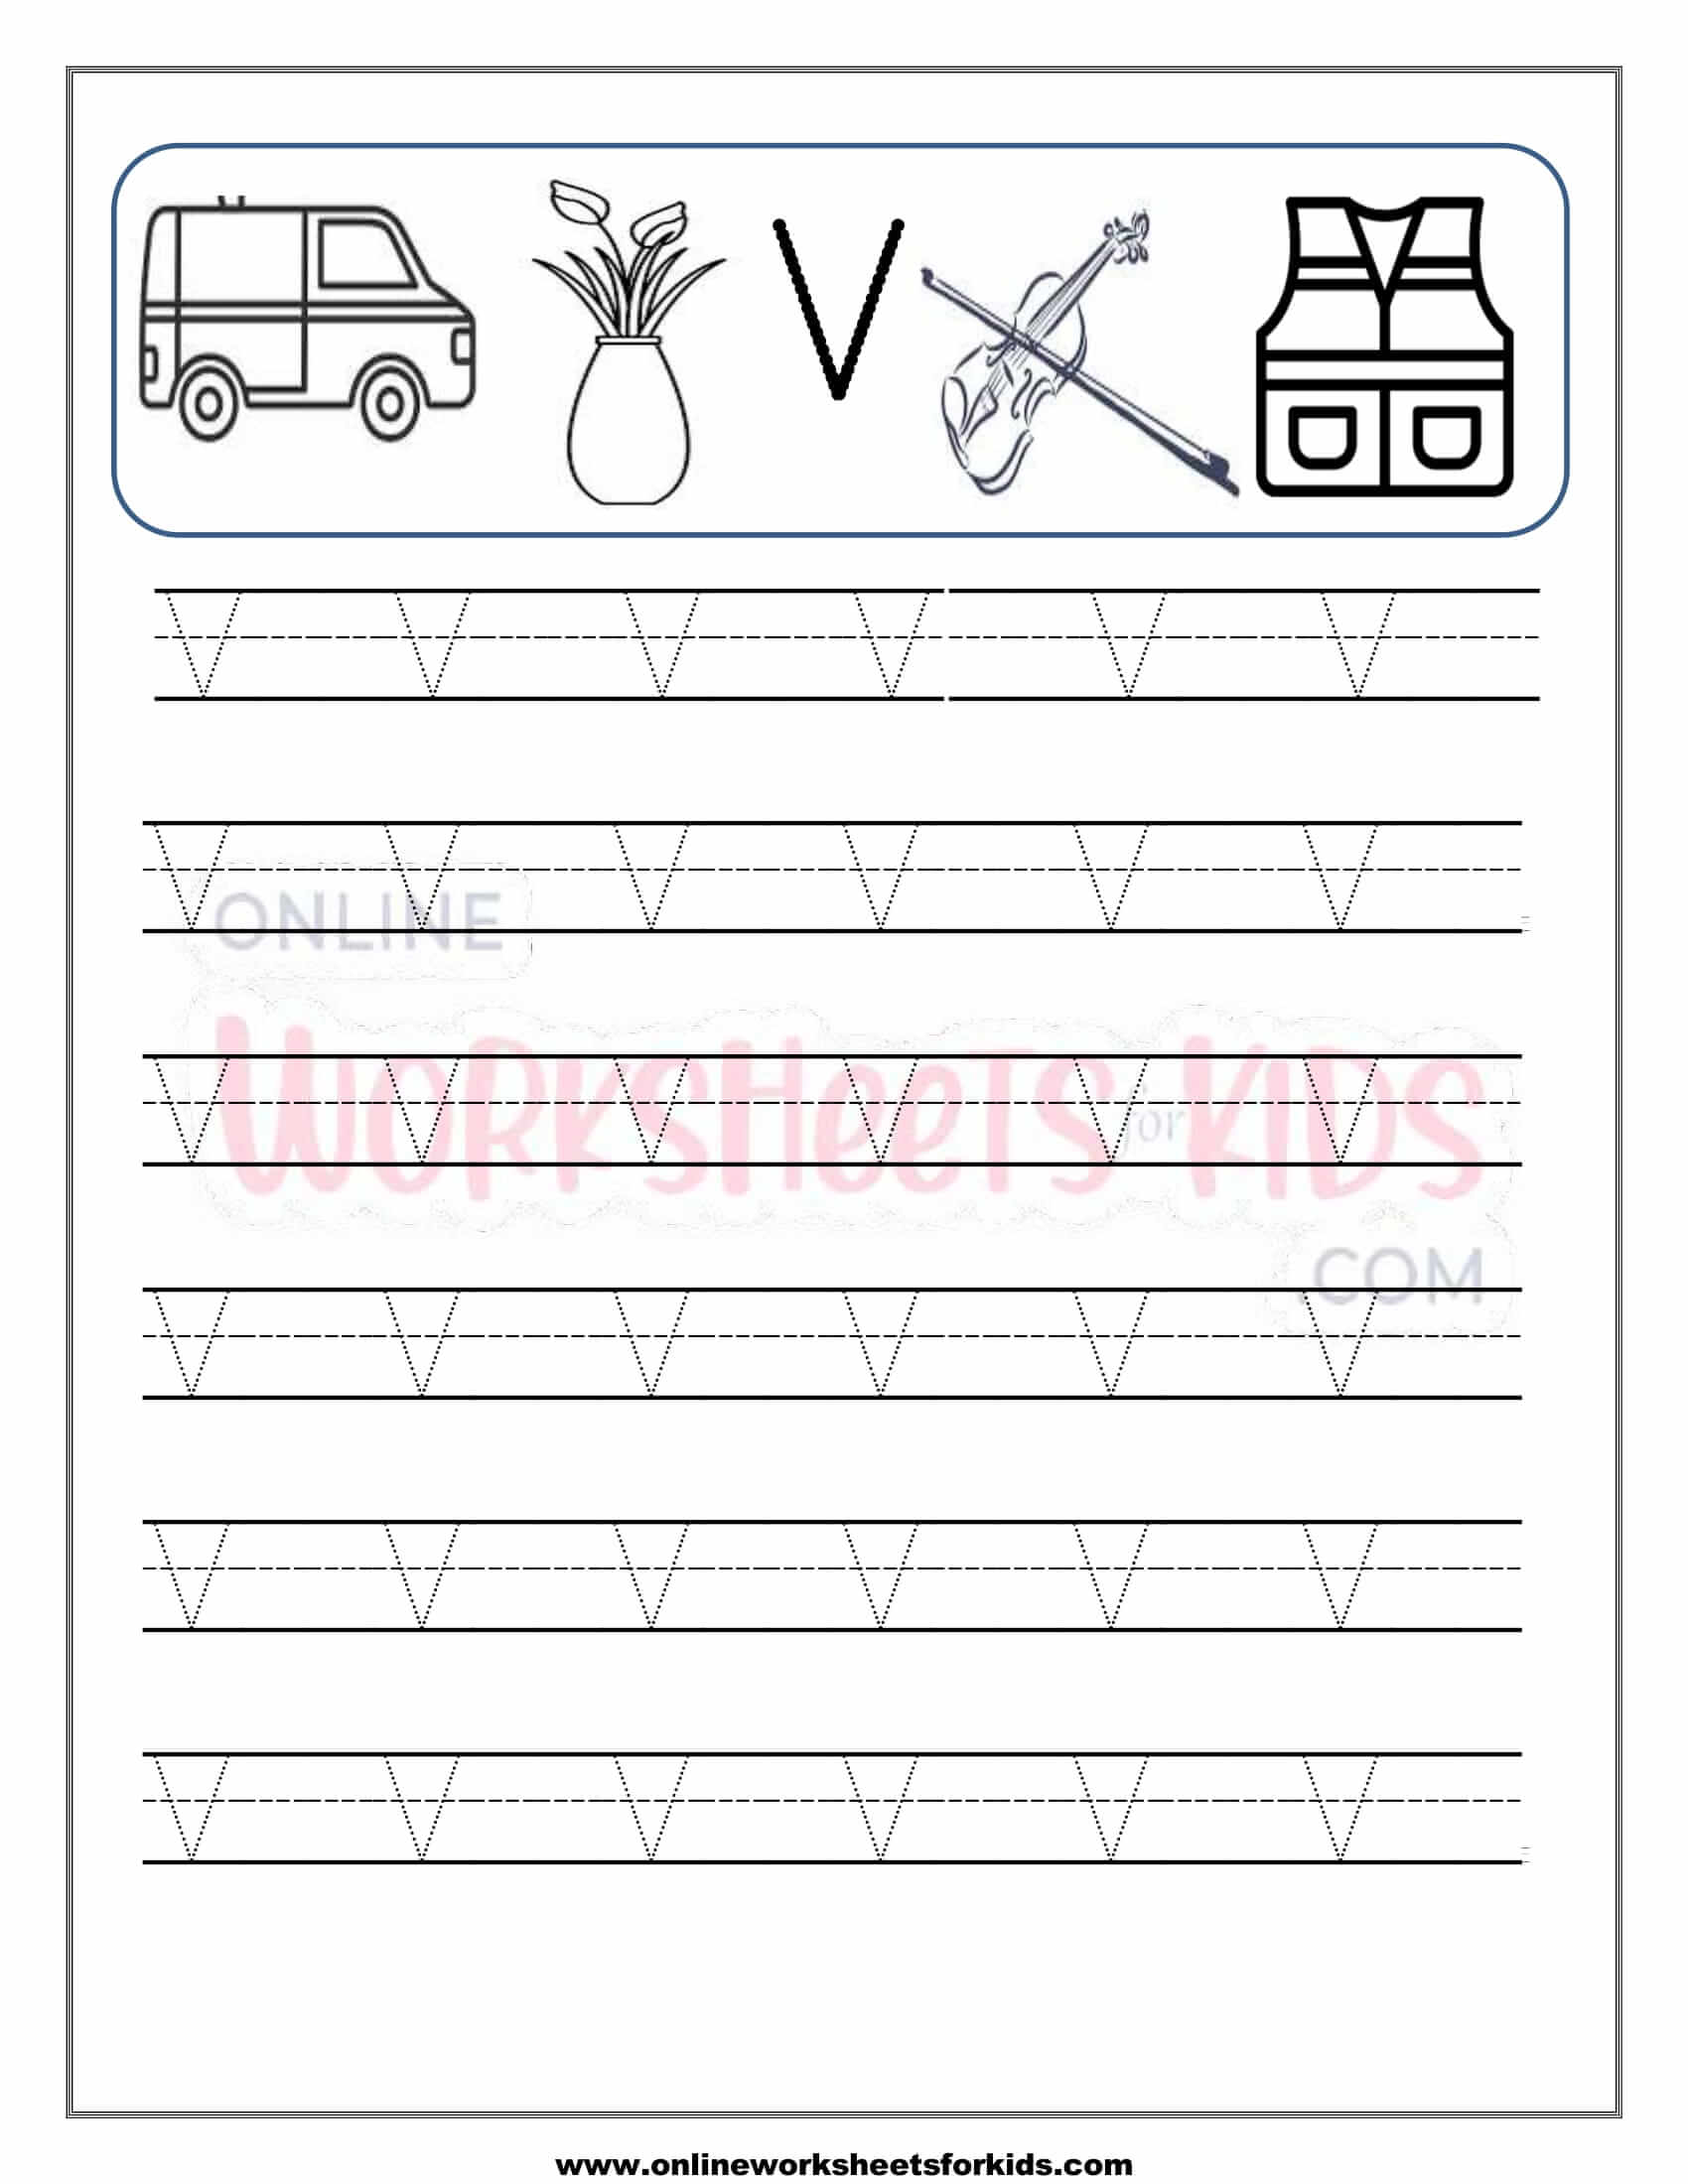 capital-letters-worksheets-first-grade-1st-grade-writing-worksheets-capital-letters-worksheet